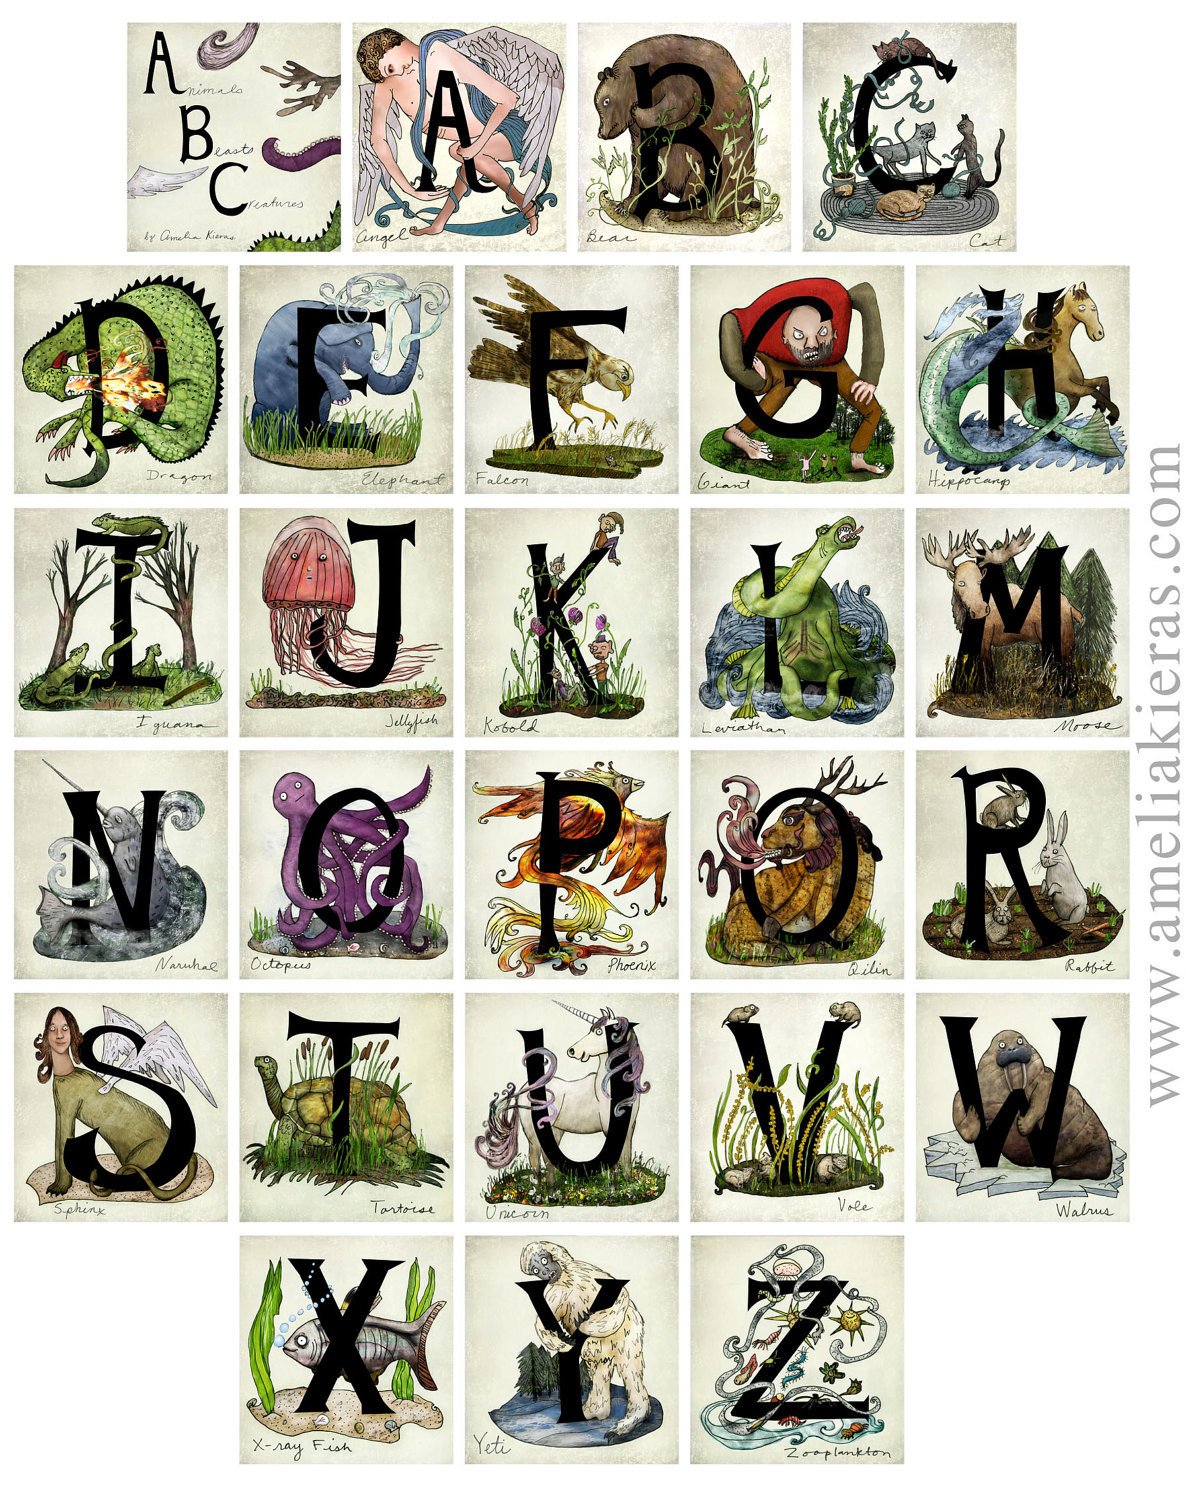 Children's ABC Board Book - Animals, Beasts, and Creatures